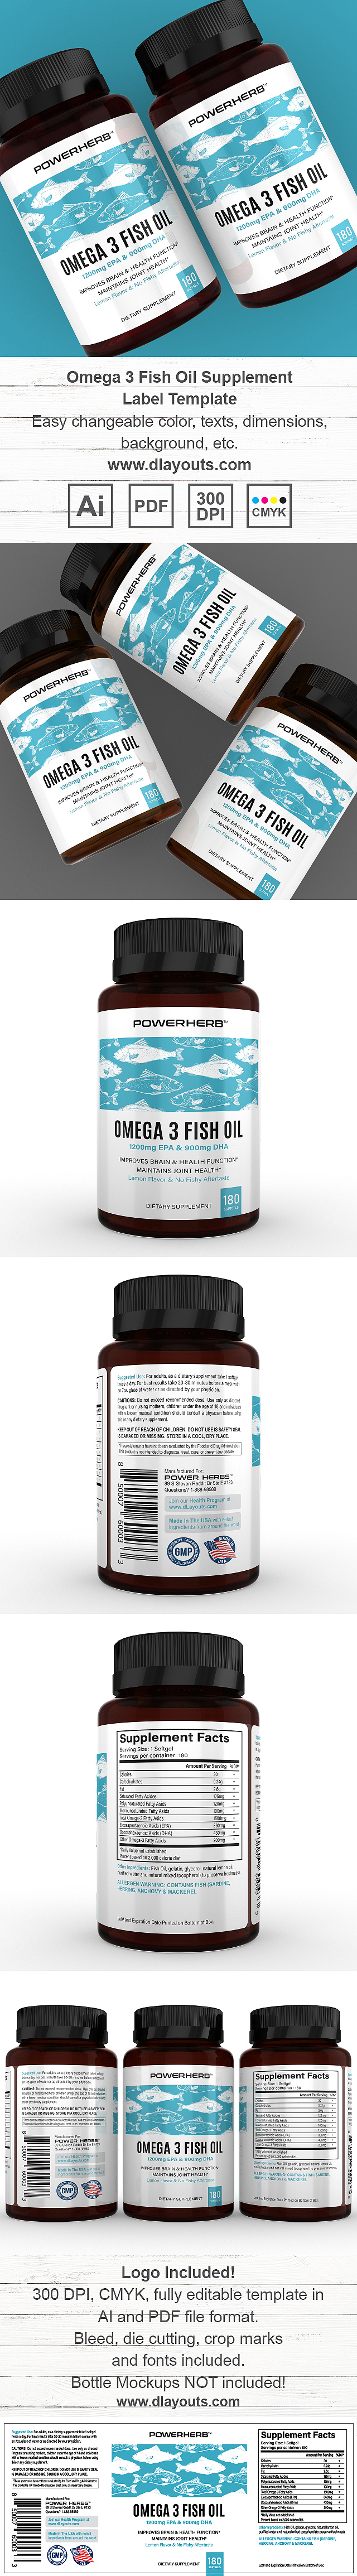 Omega 3 Fish Oil Supplement Label Template